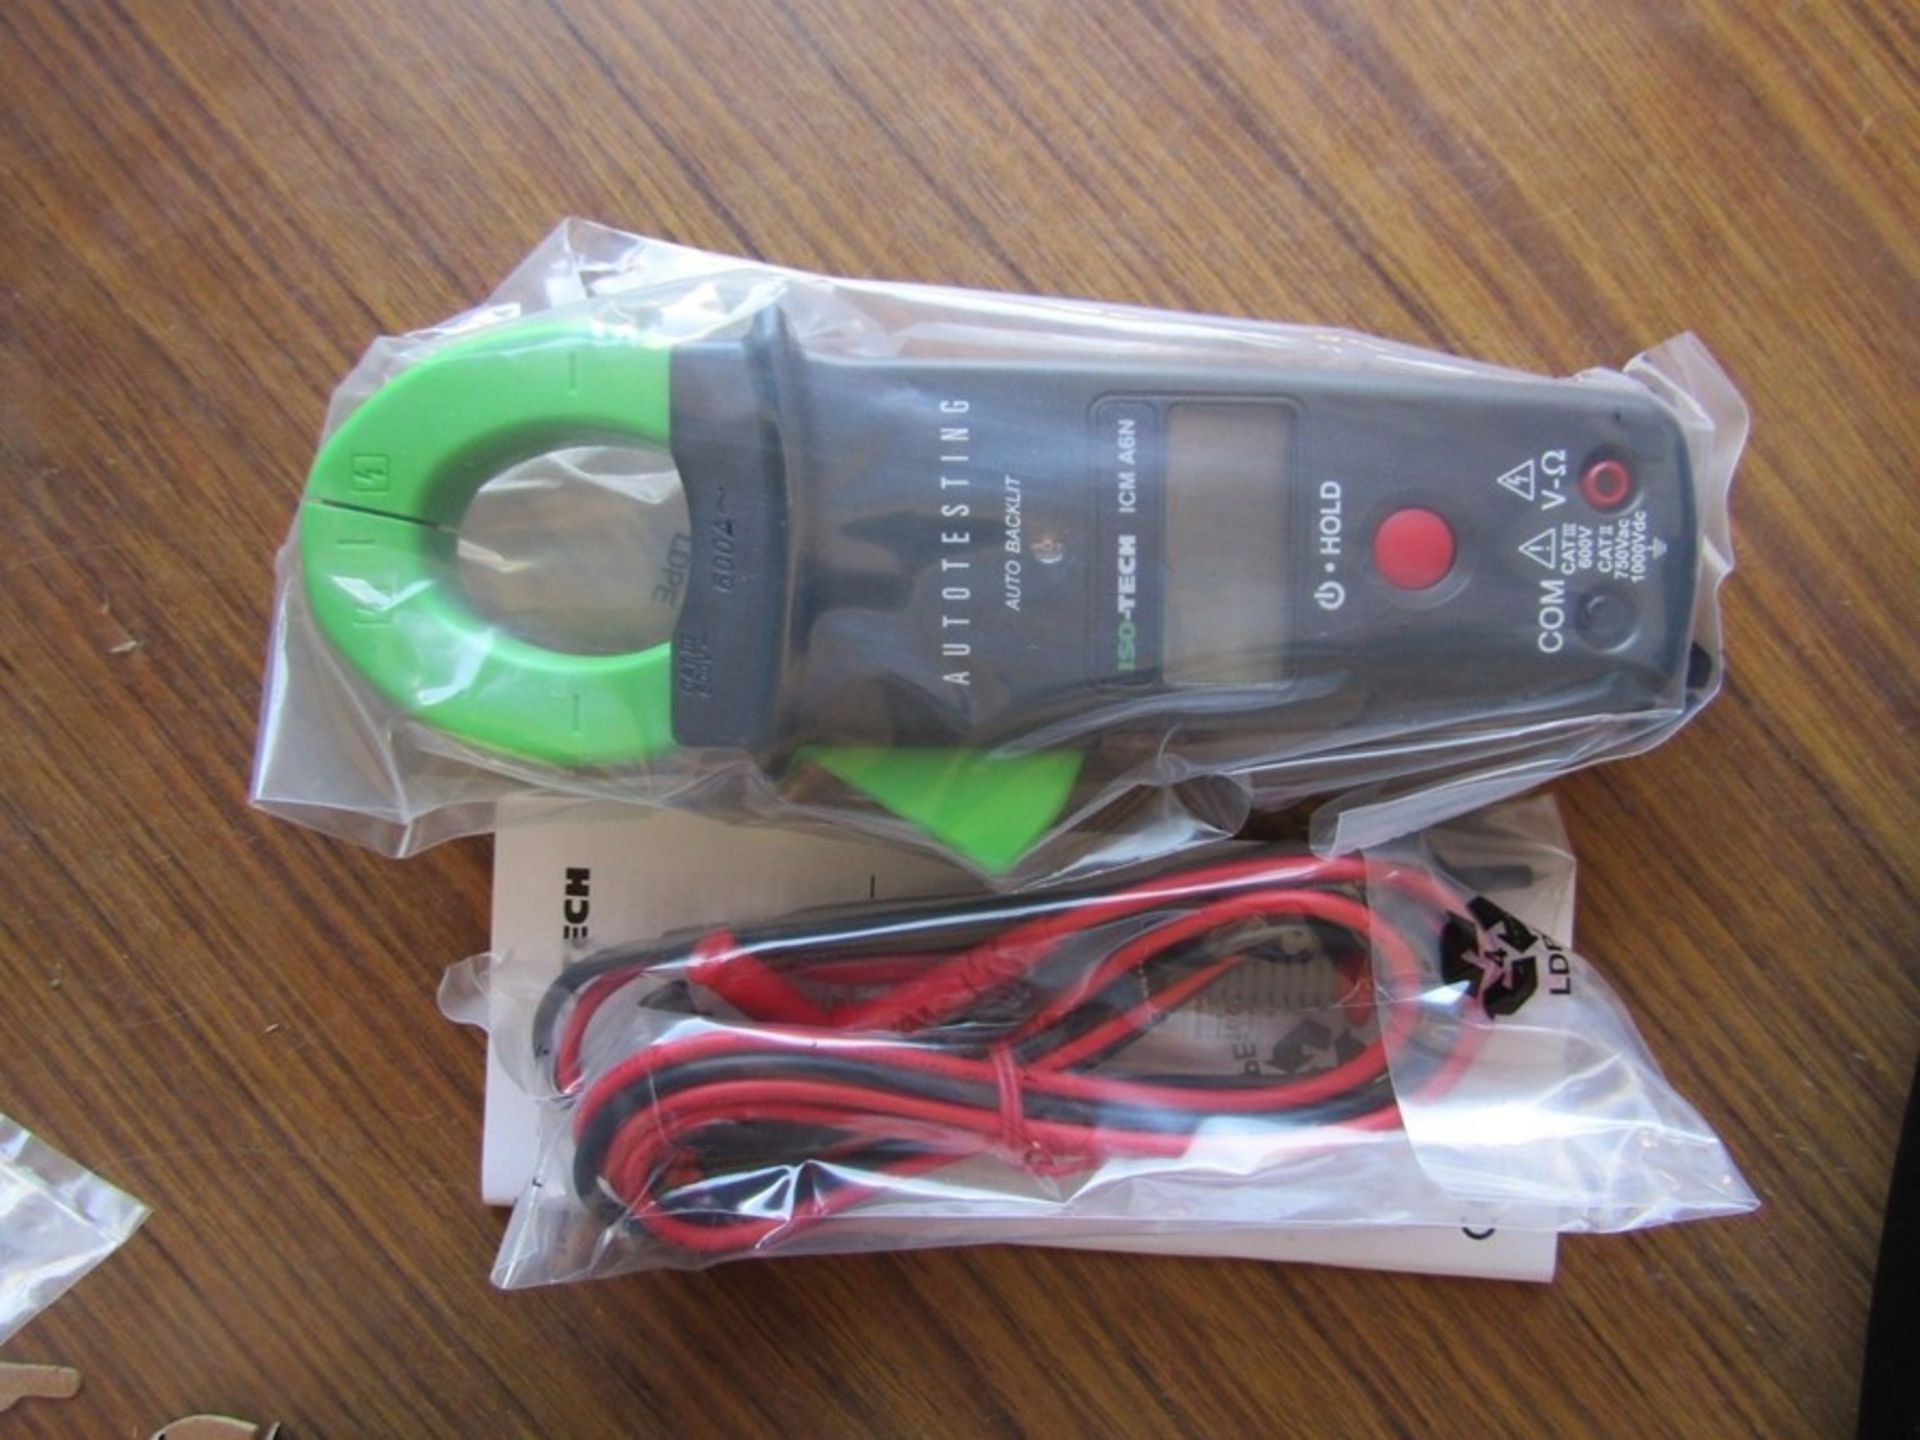 16 x NEW ISO-TECH ICM A6N Clamp Meter, Max Current 600A CAT III 600 V